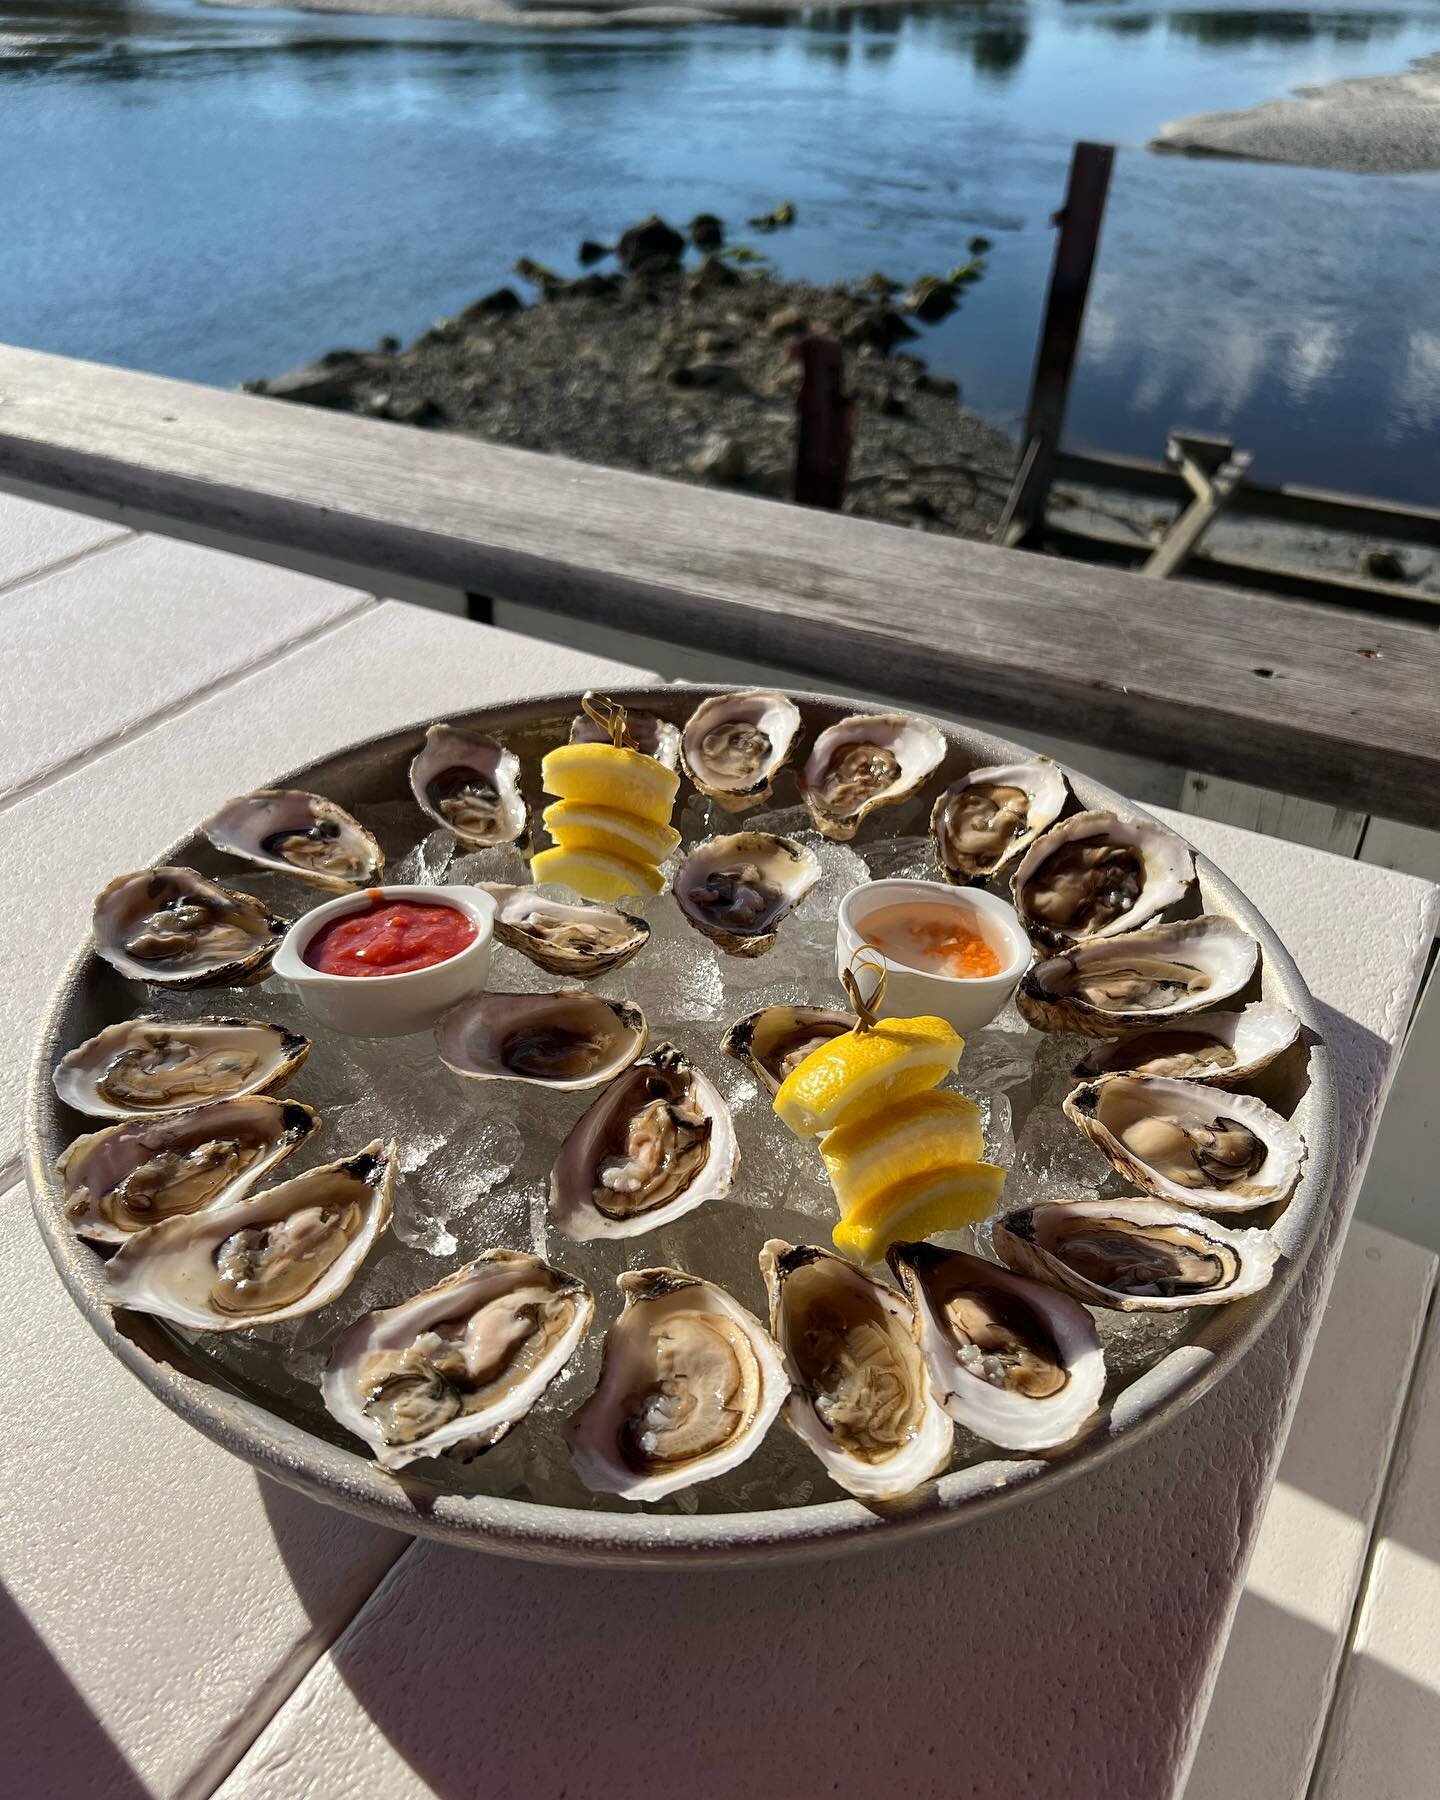 Oysters on the half shell are a nice refreshing appetizer